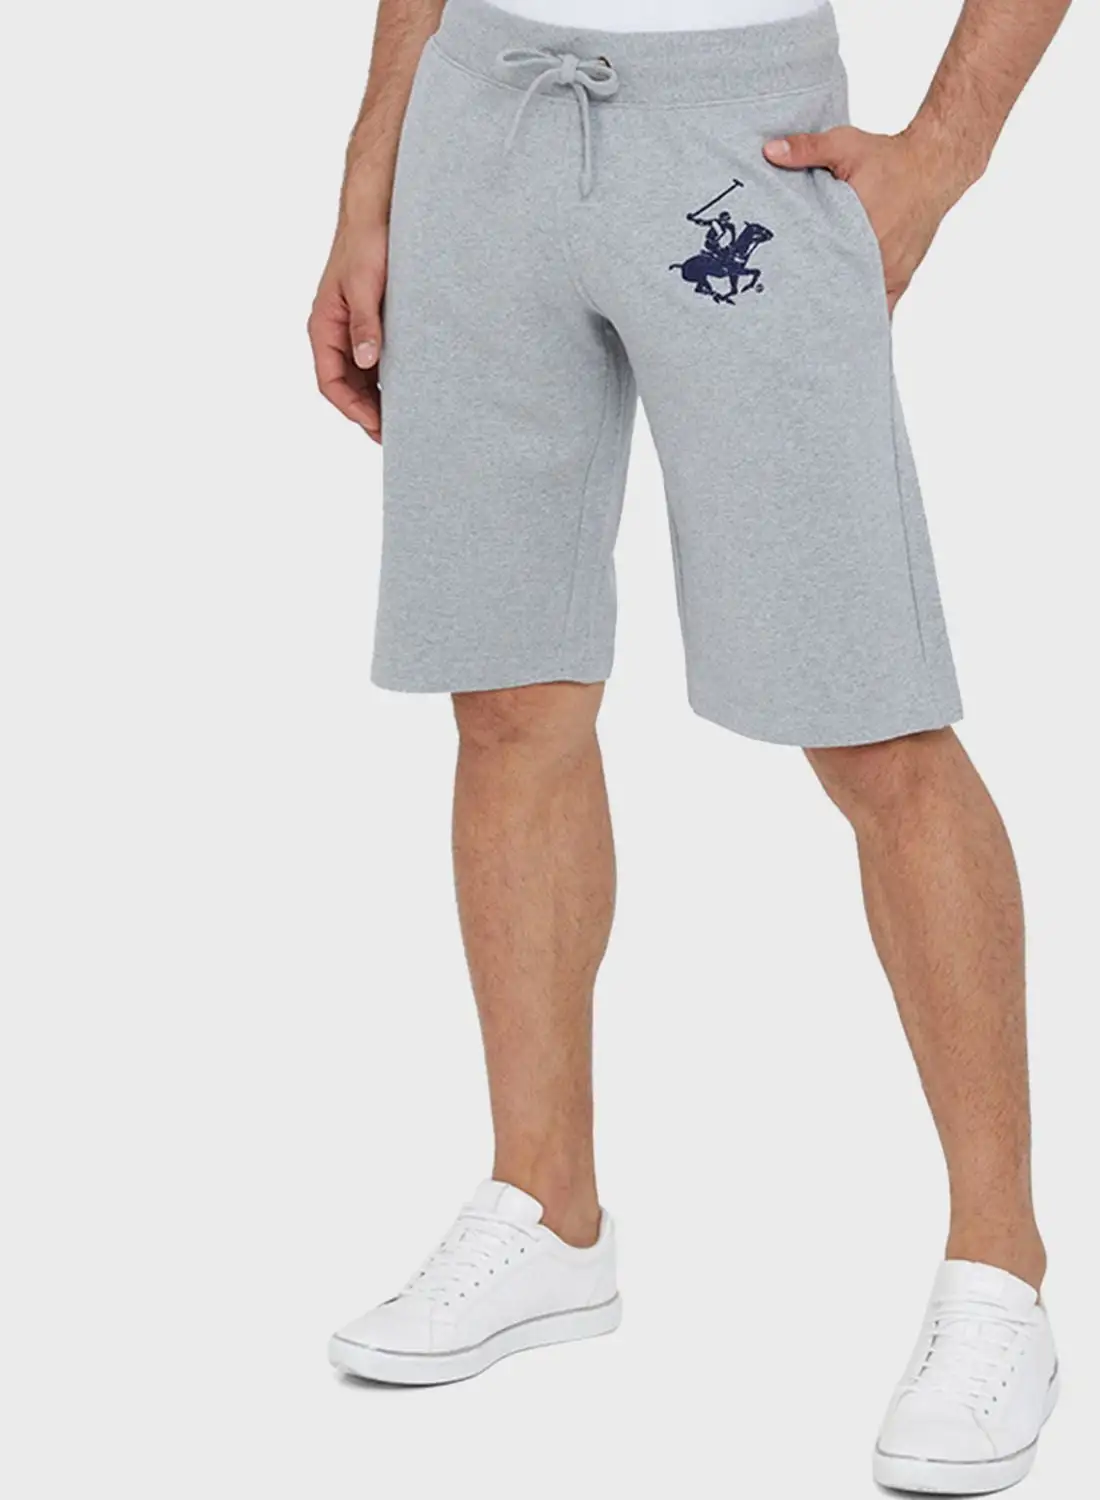 BEVERLY HILLS POLO CLUB Embroidered Logo Shorts Grey